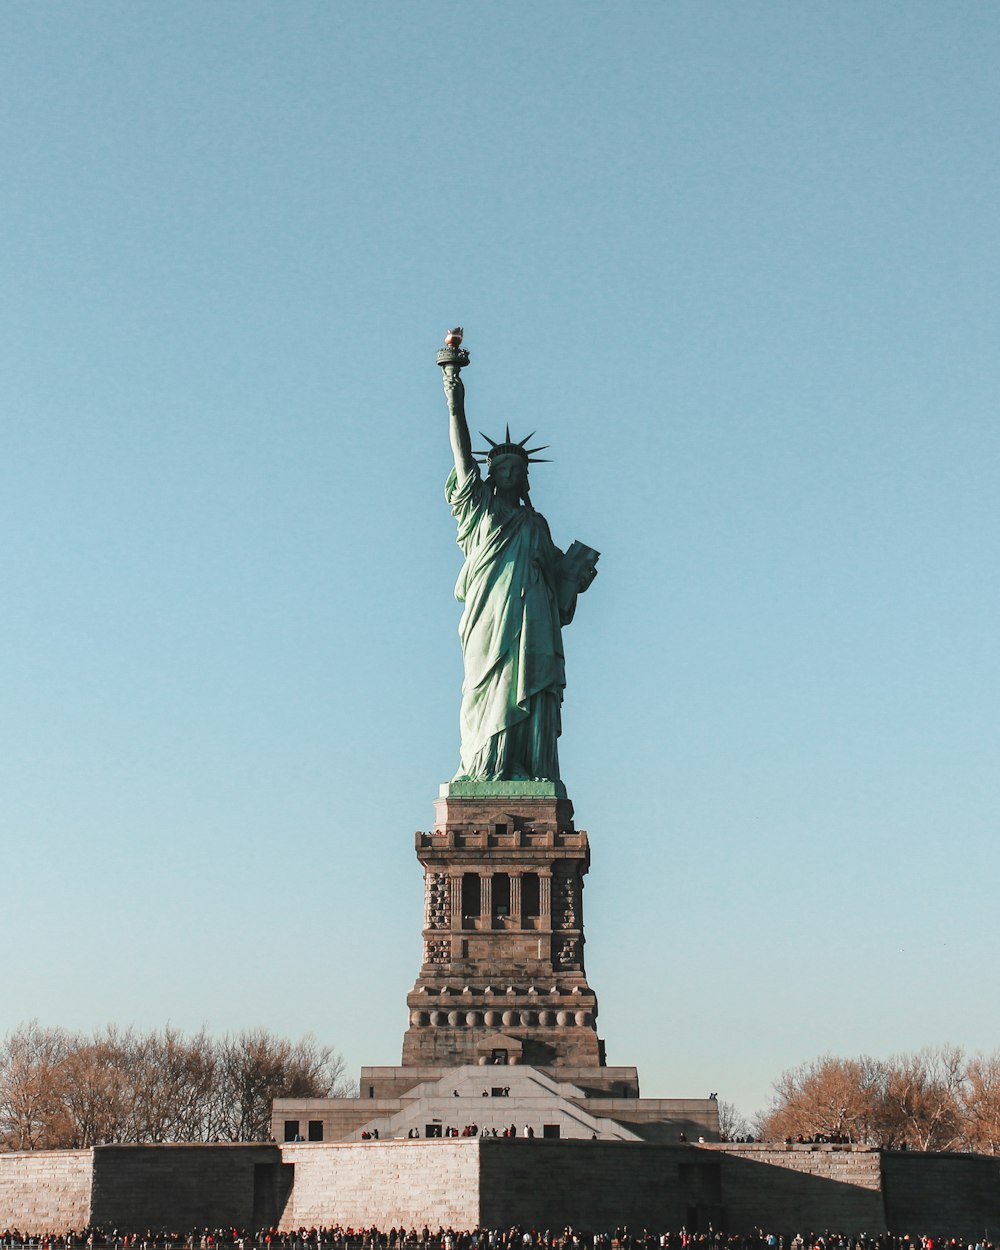 the statue of liberty is surrounded by a crowd of people